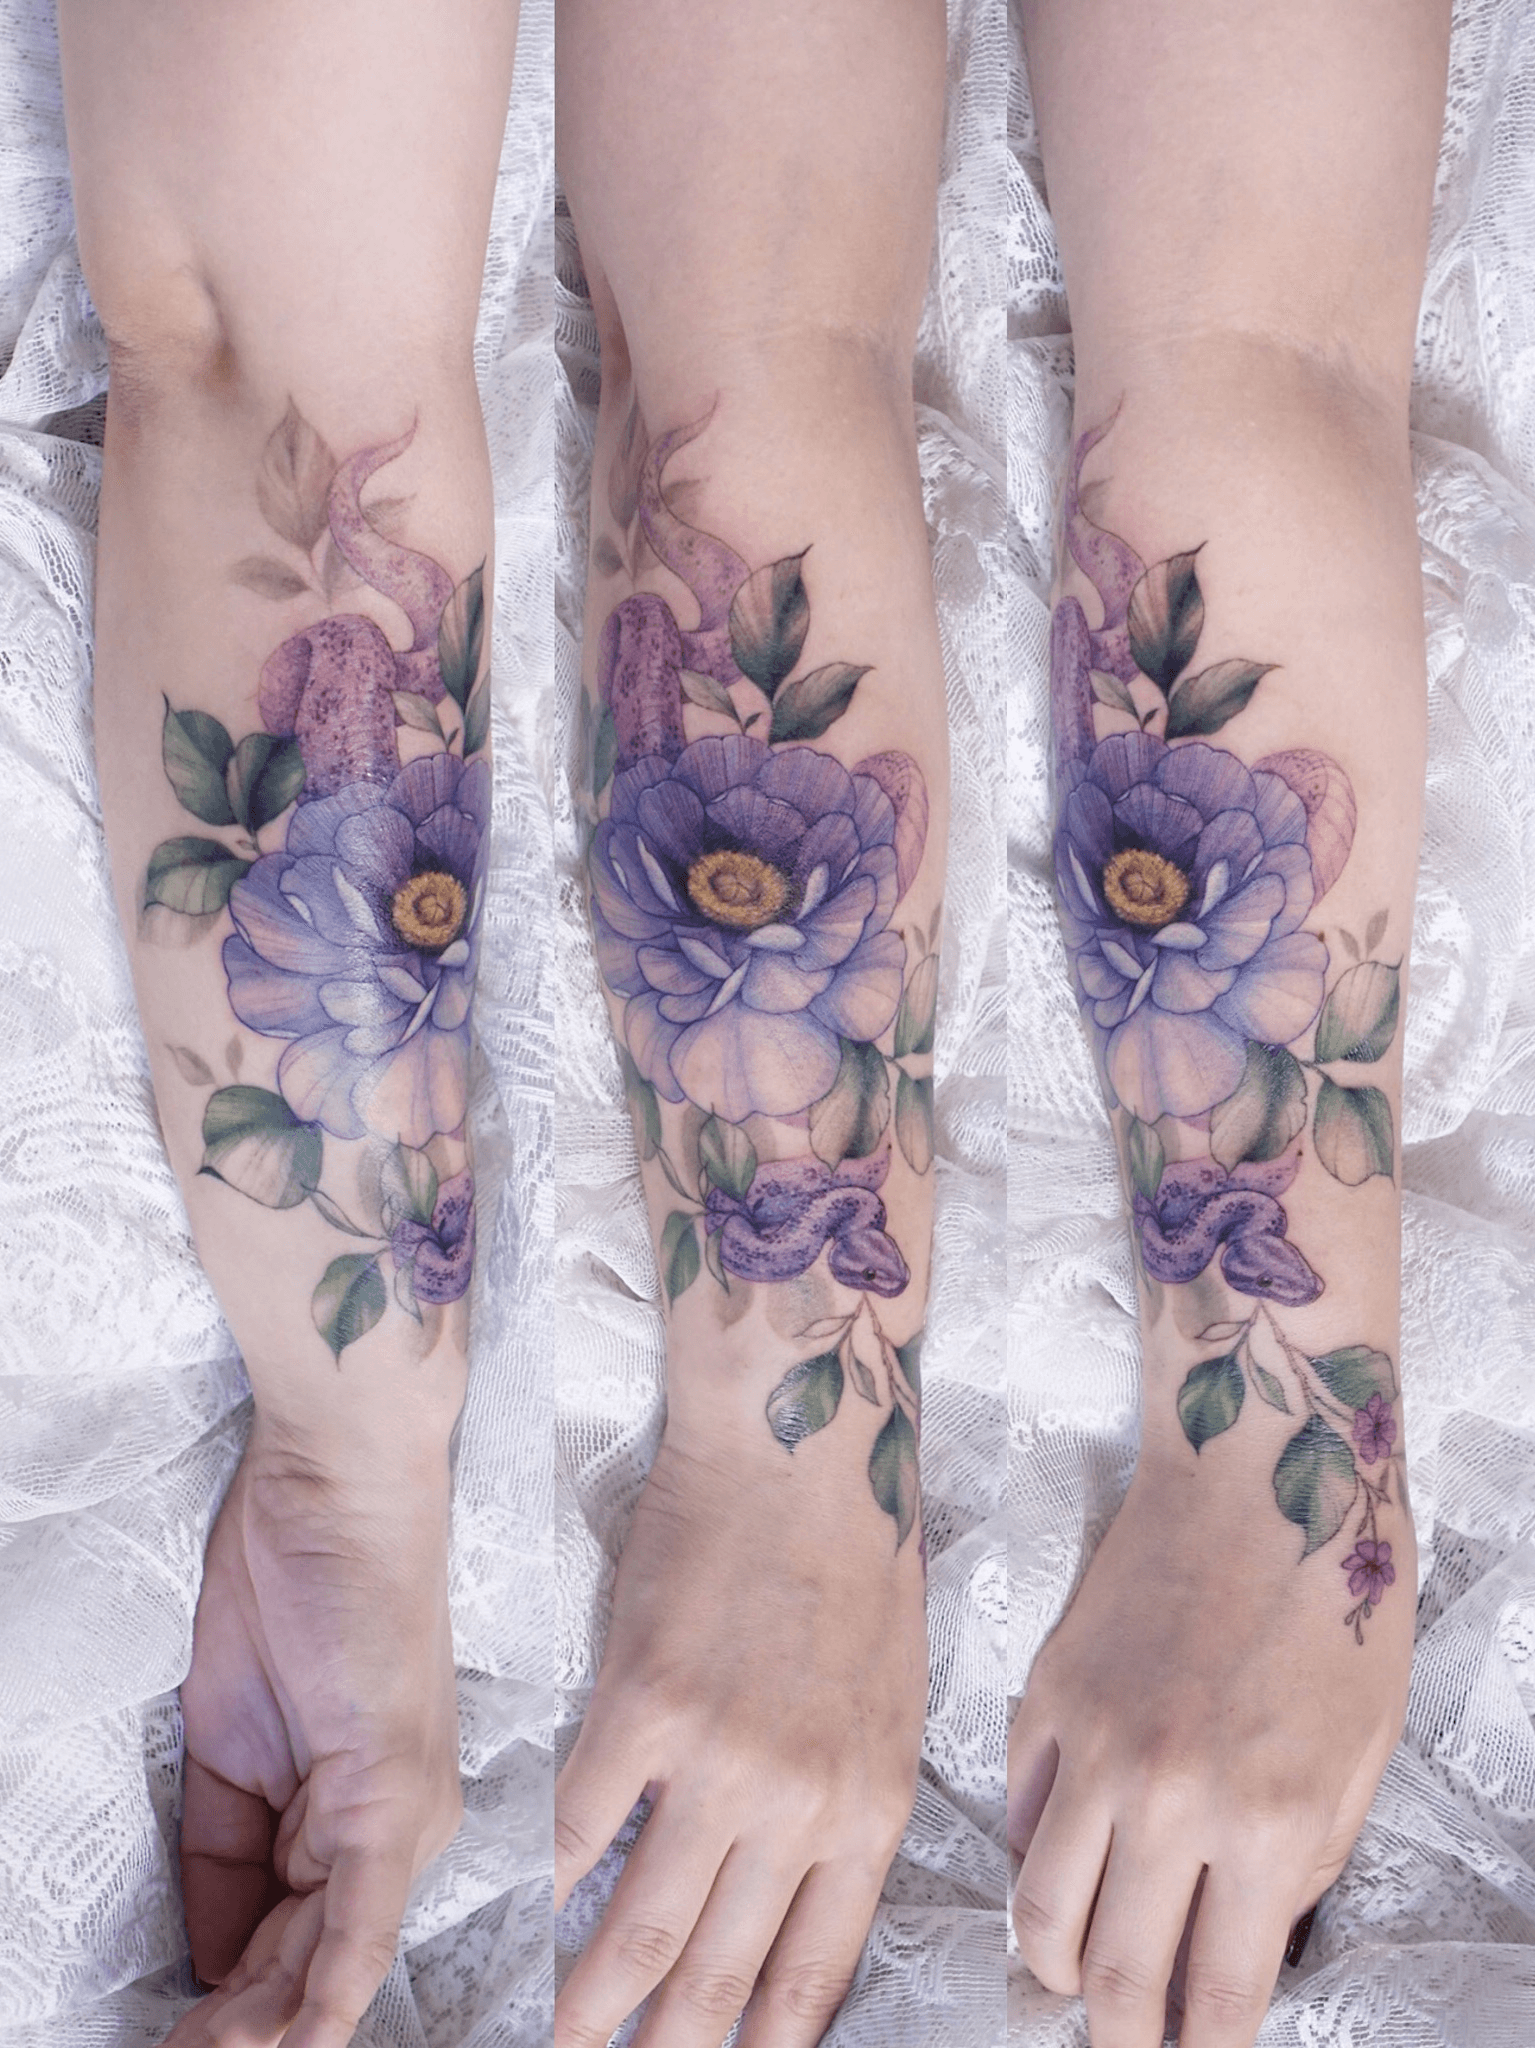 Flower forearm piece to cover scars and old tattoos Done by Troy Frankum  at Lucky Street in new bern NC  rtattoos